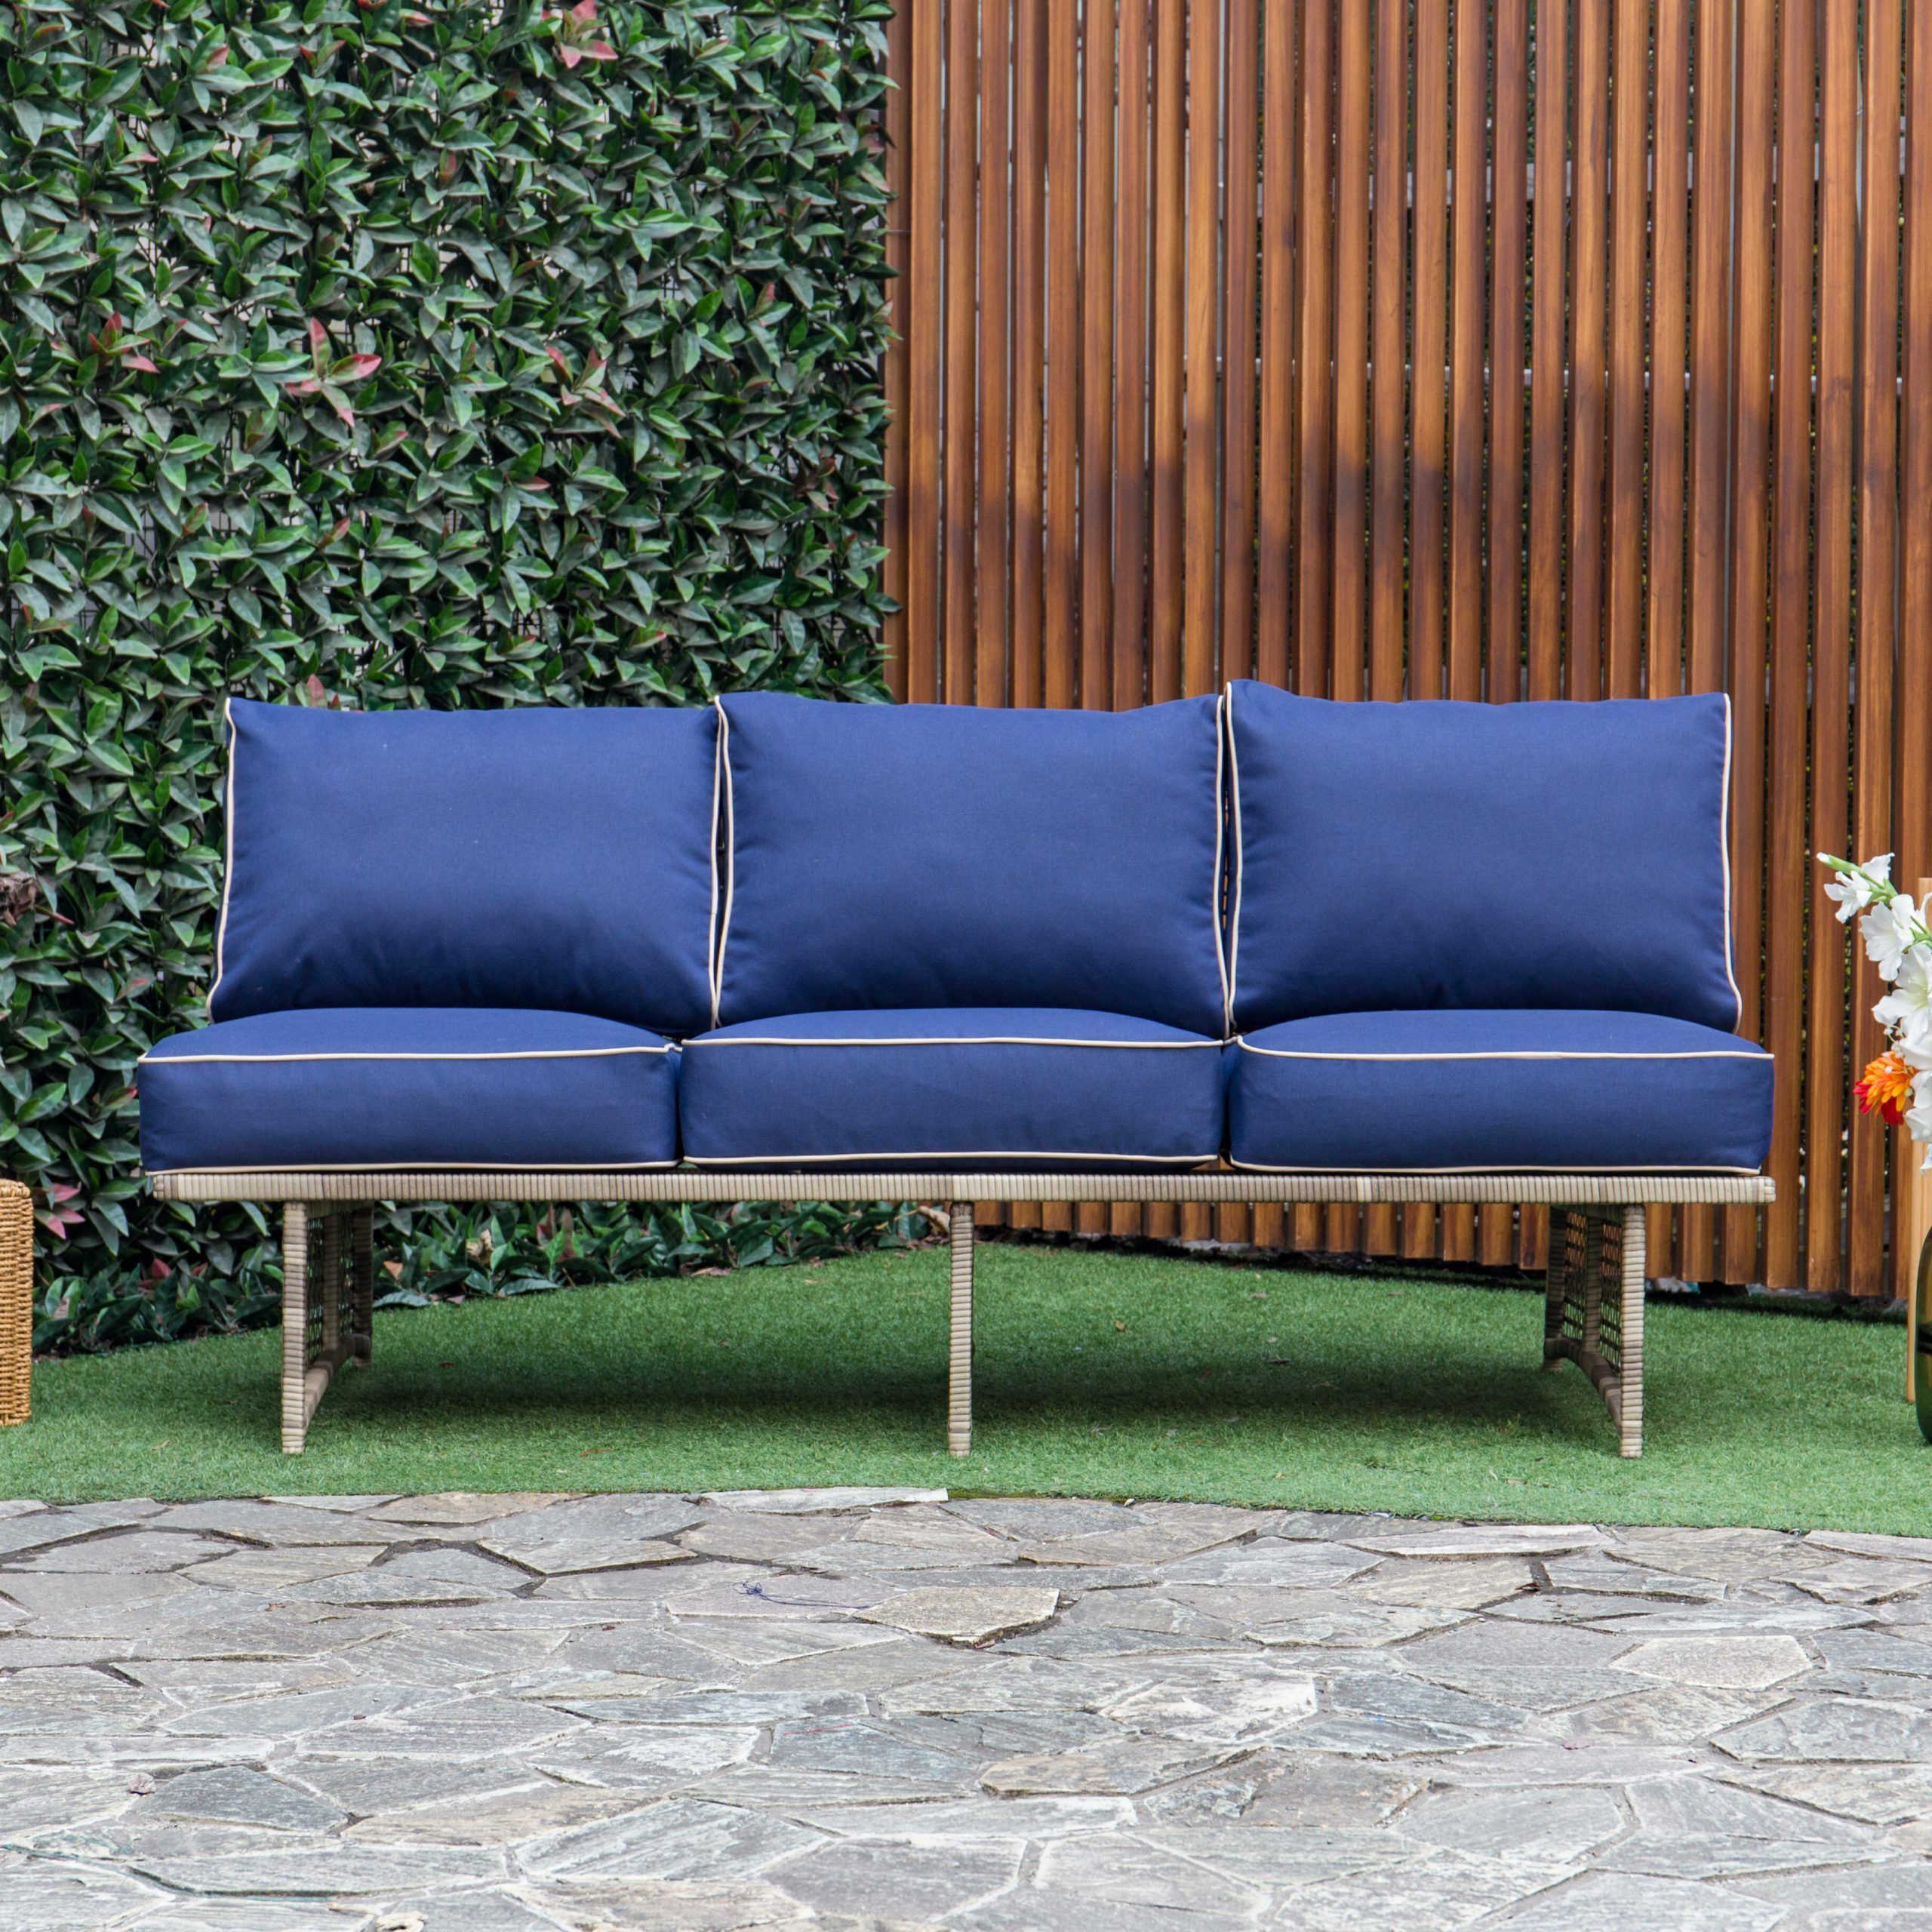 Lobdell Patio Sofas With Cushions Inside Most Recent Dakota Outdoor Rattan Patio Sofa With Cushions (View 6 of 25)